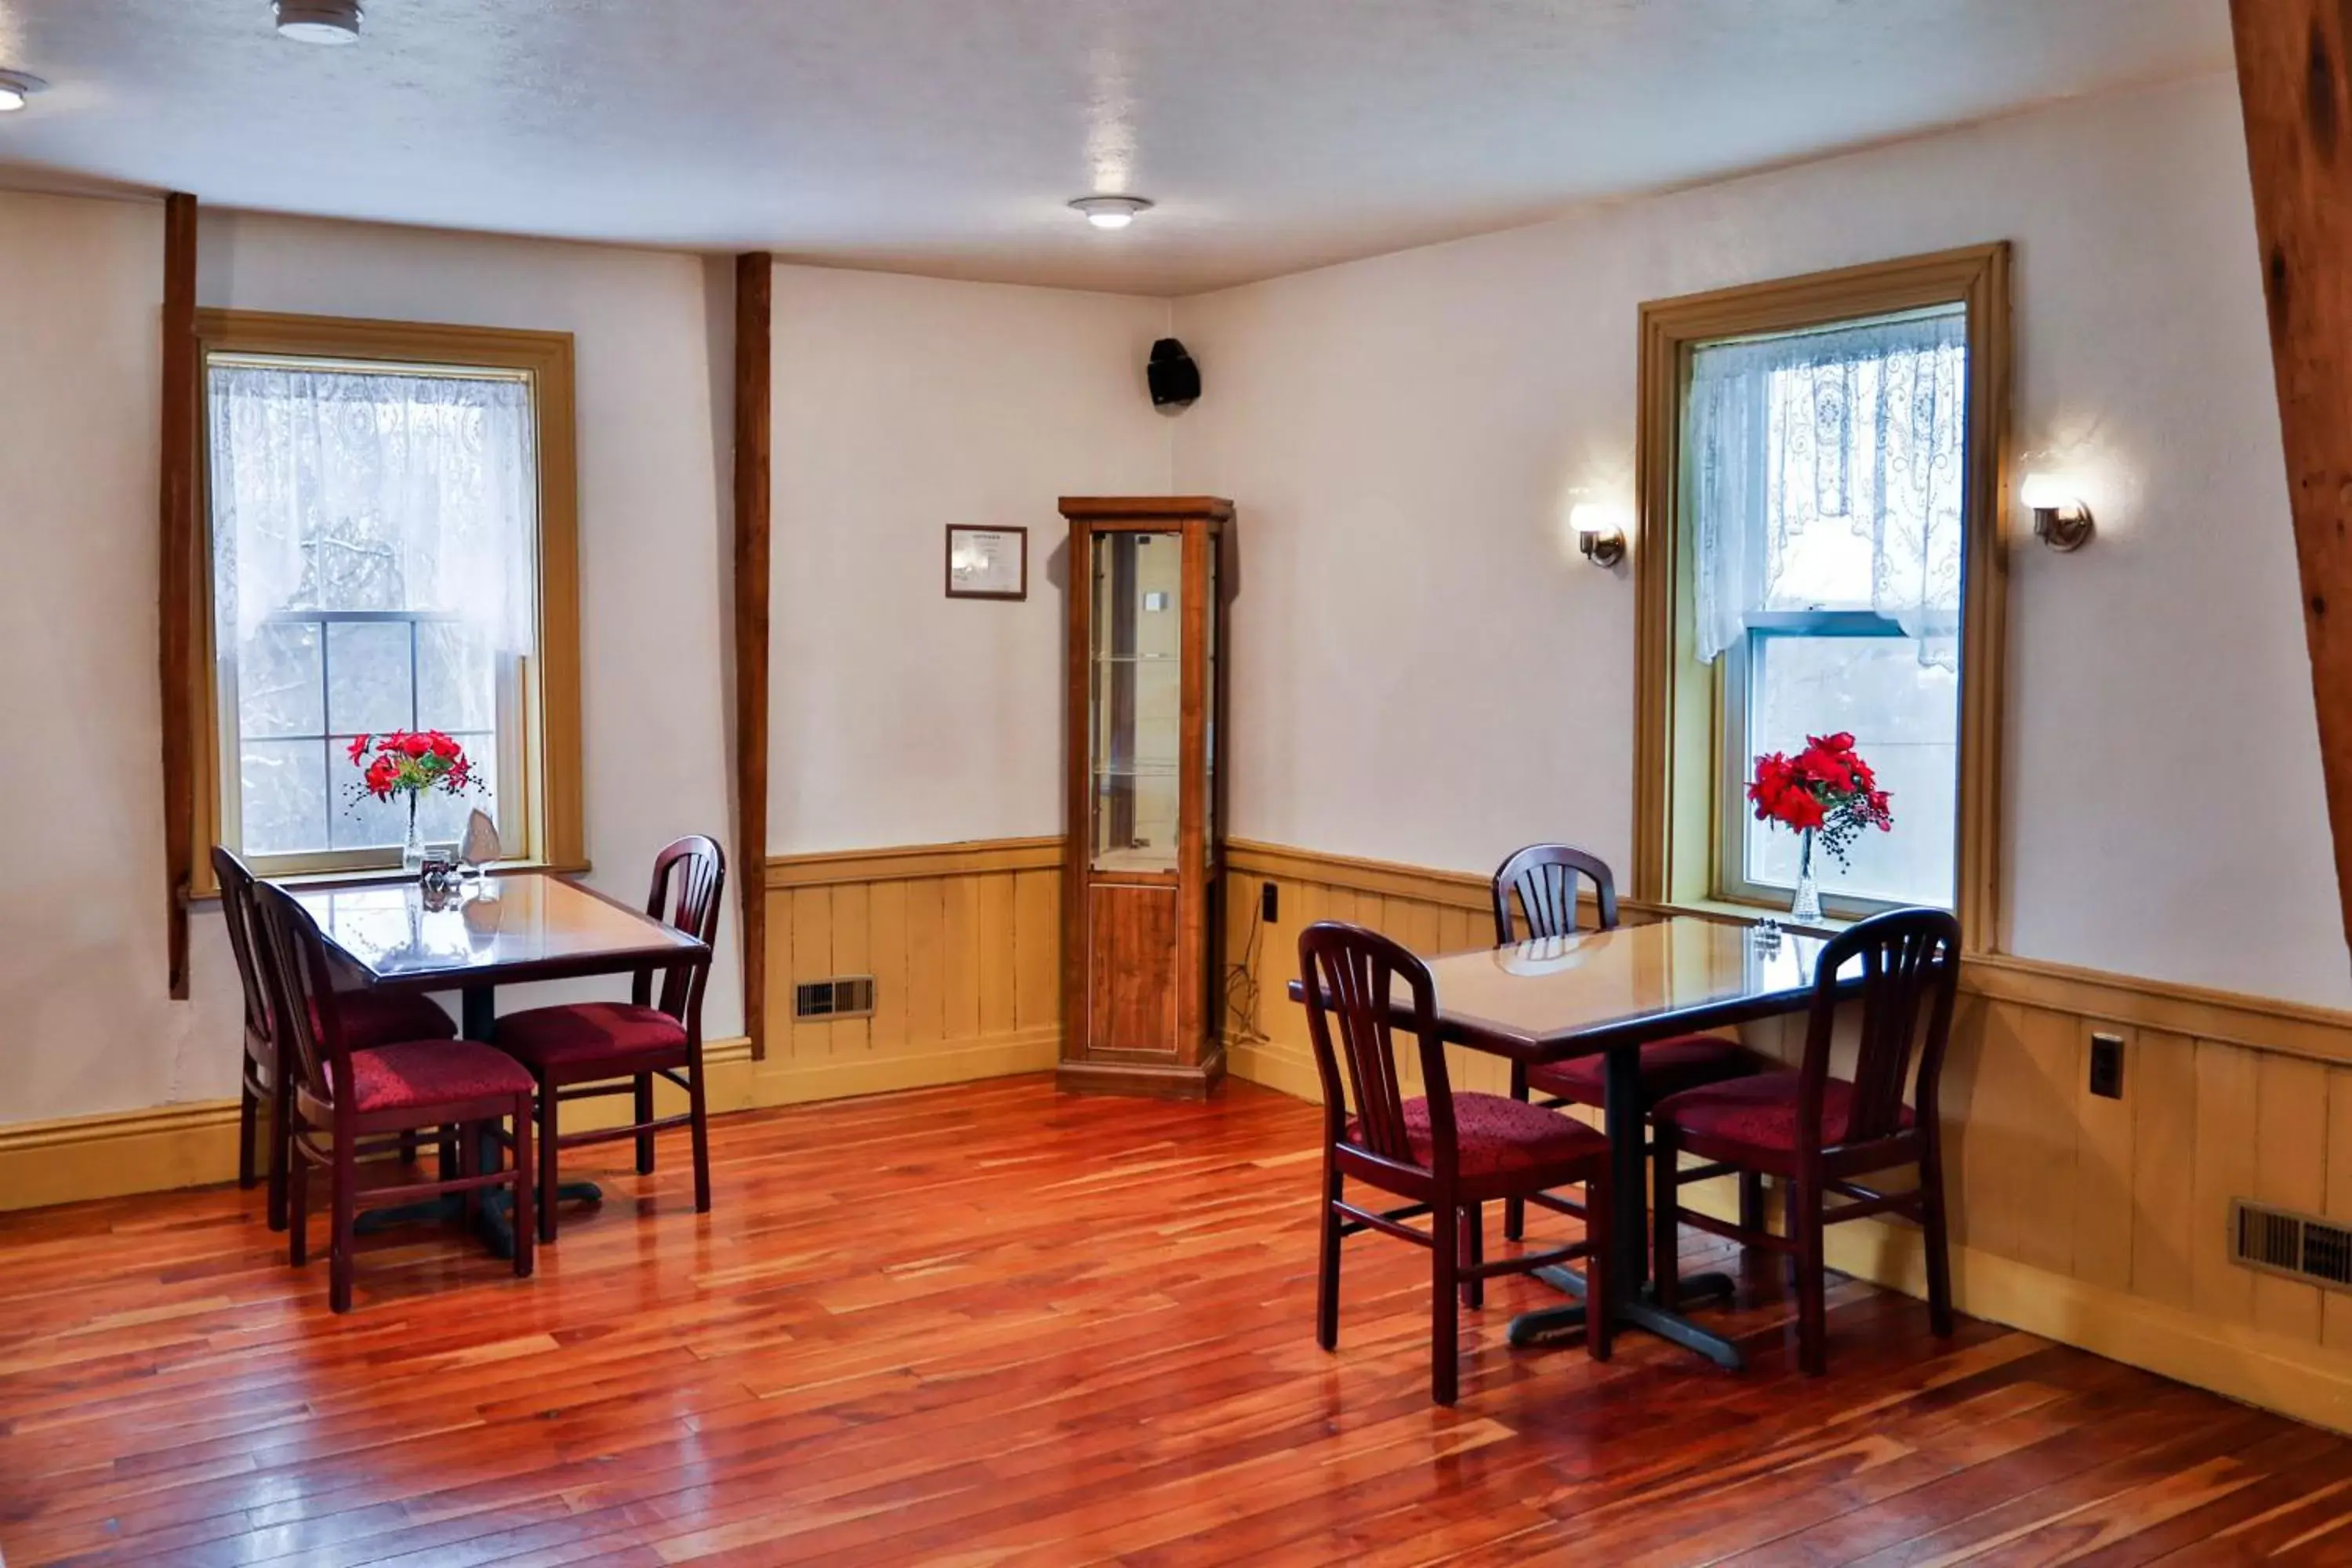 Dining Area in Baneberry Meadows B&B